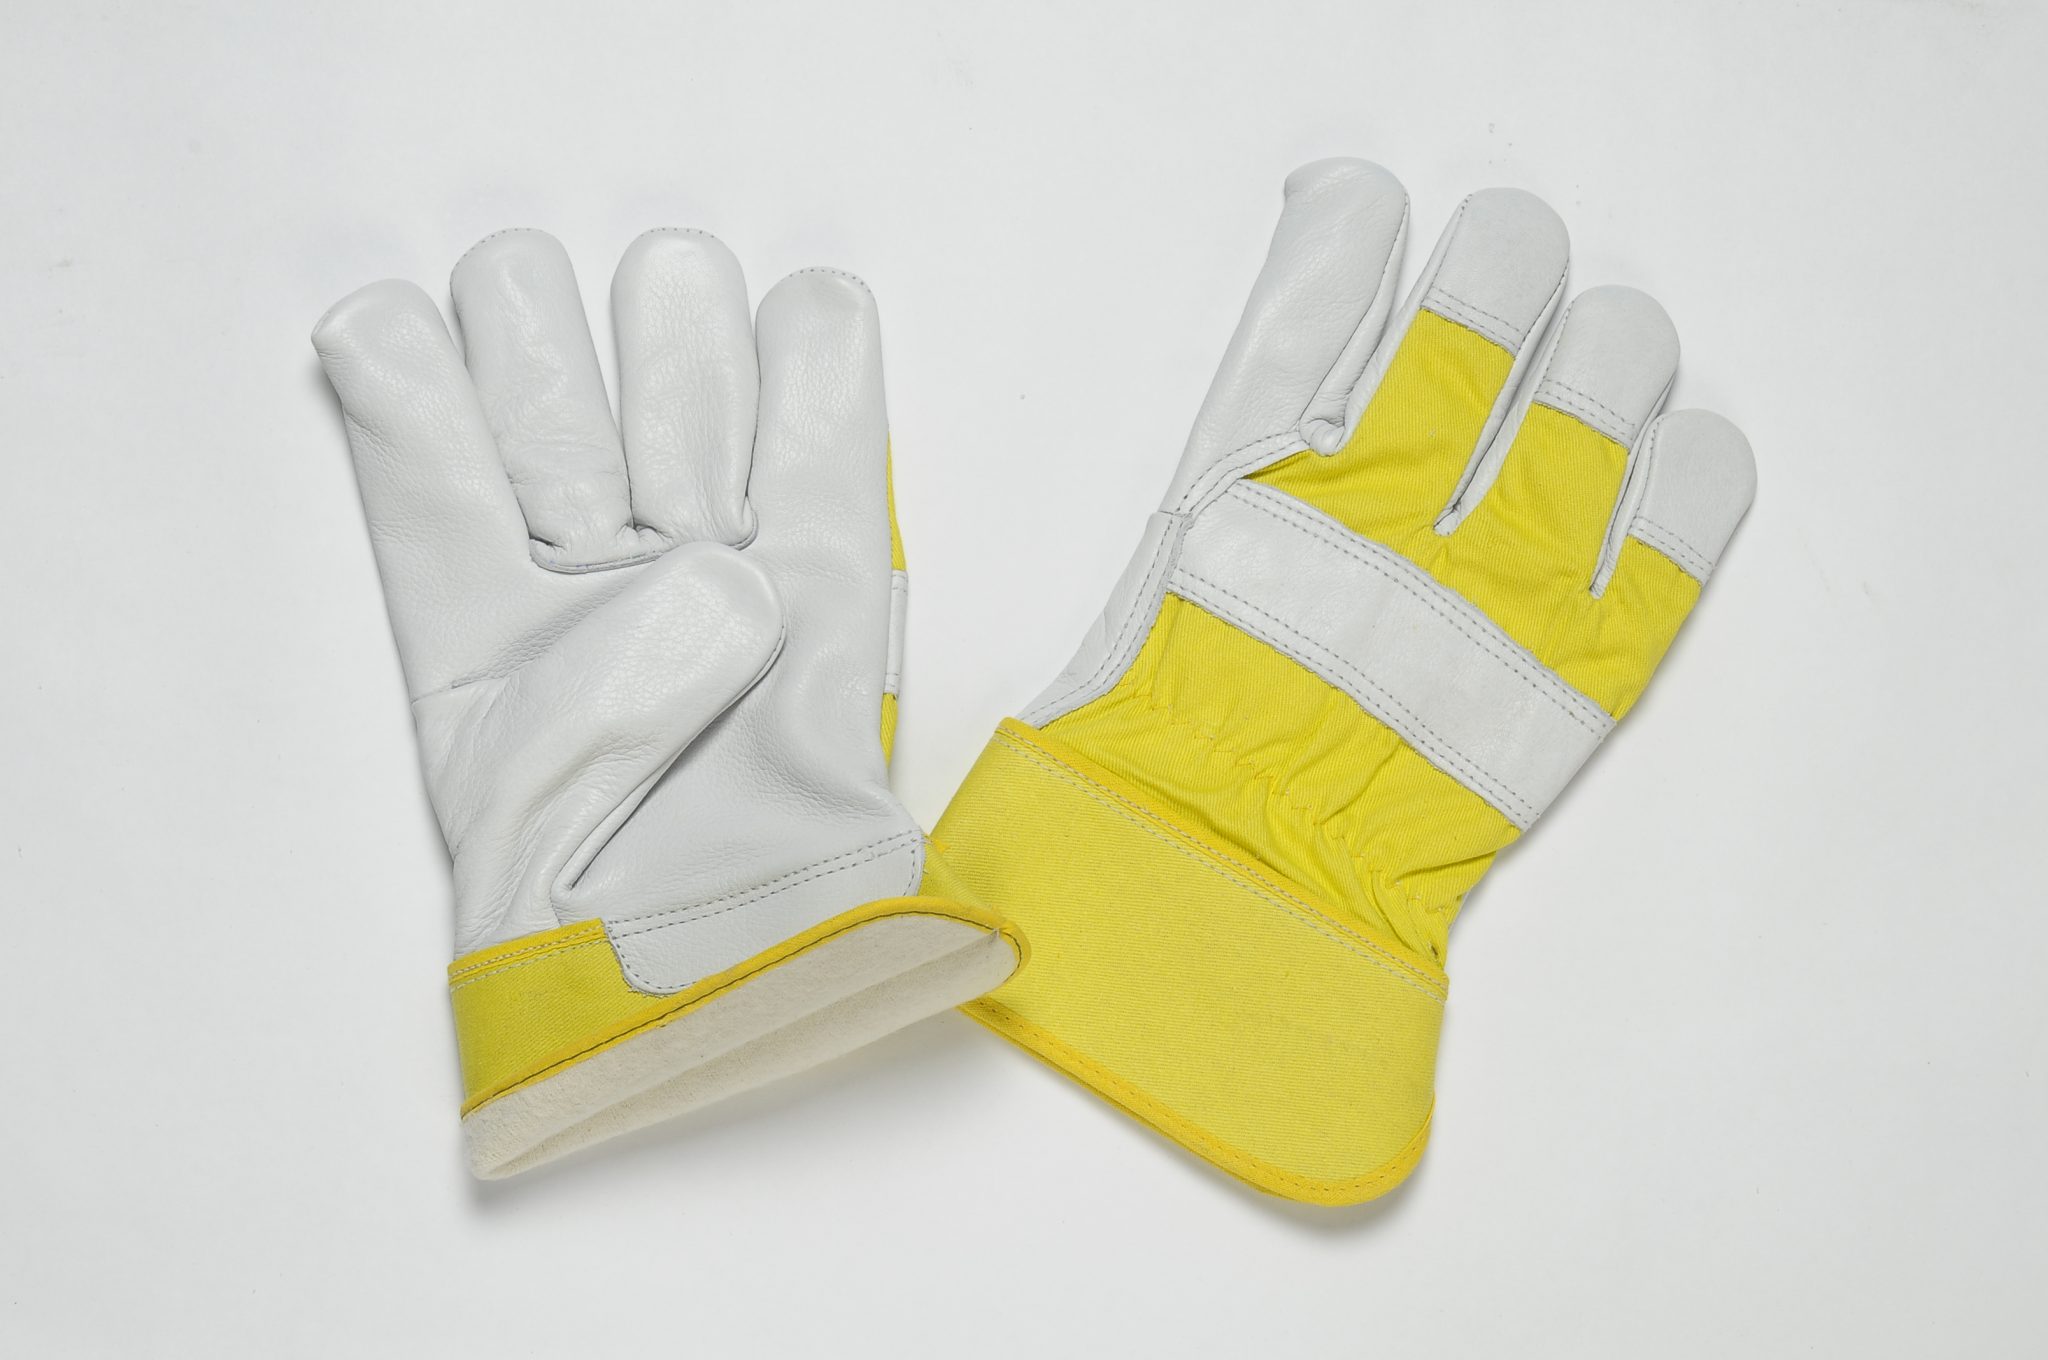 NATURAL GRAIN GLOVES. FULL FLANNEL LINING . YELLOW CUFF & BACK. ADJUSTIBLE ELASTIC IN THE WRIST.